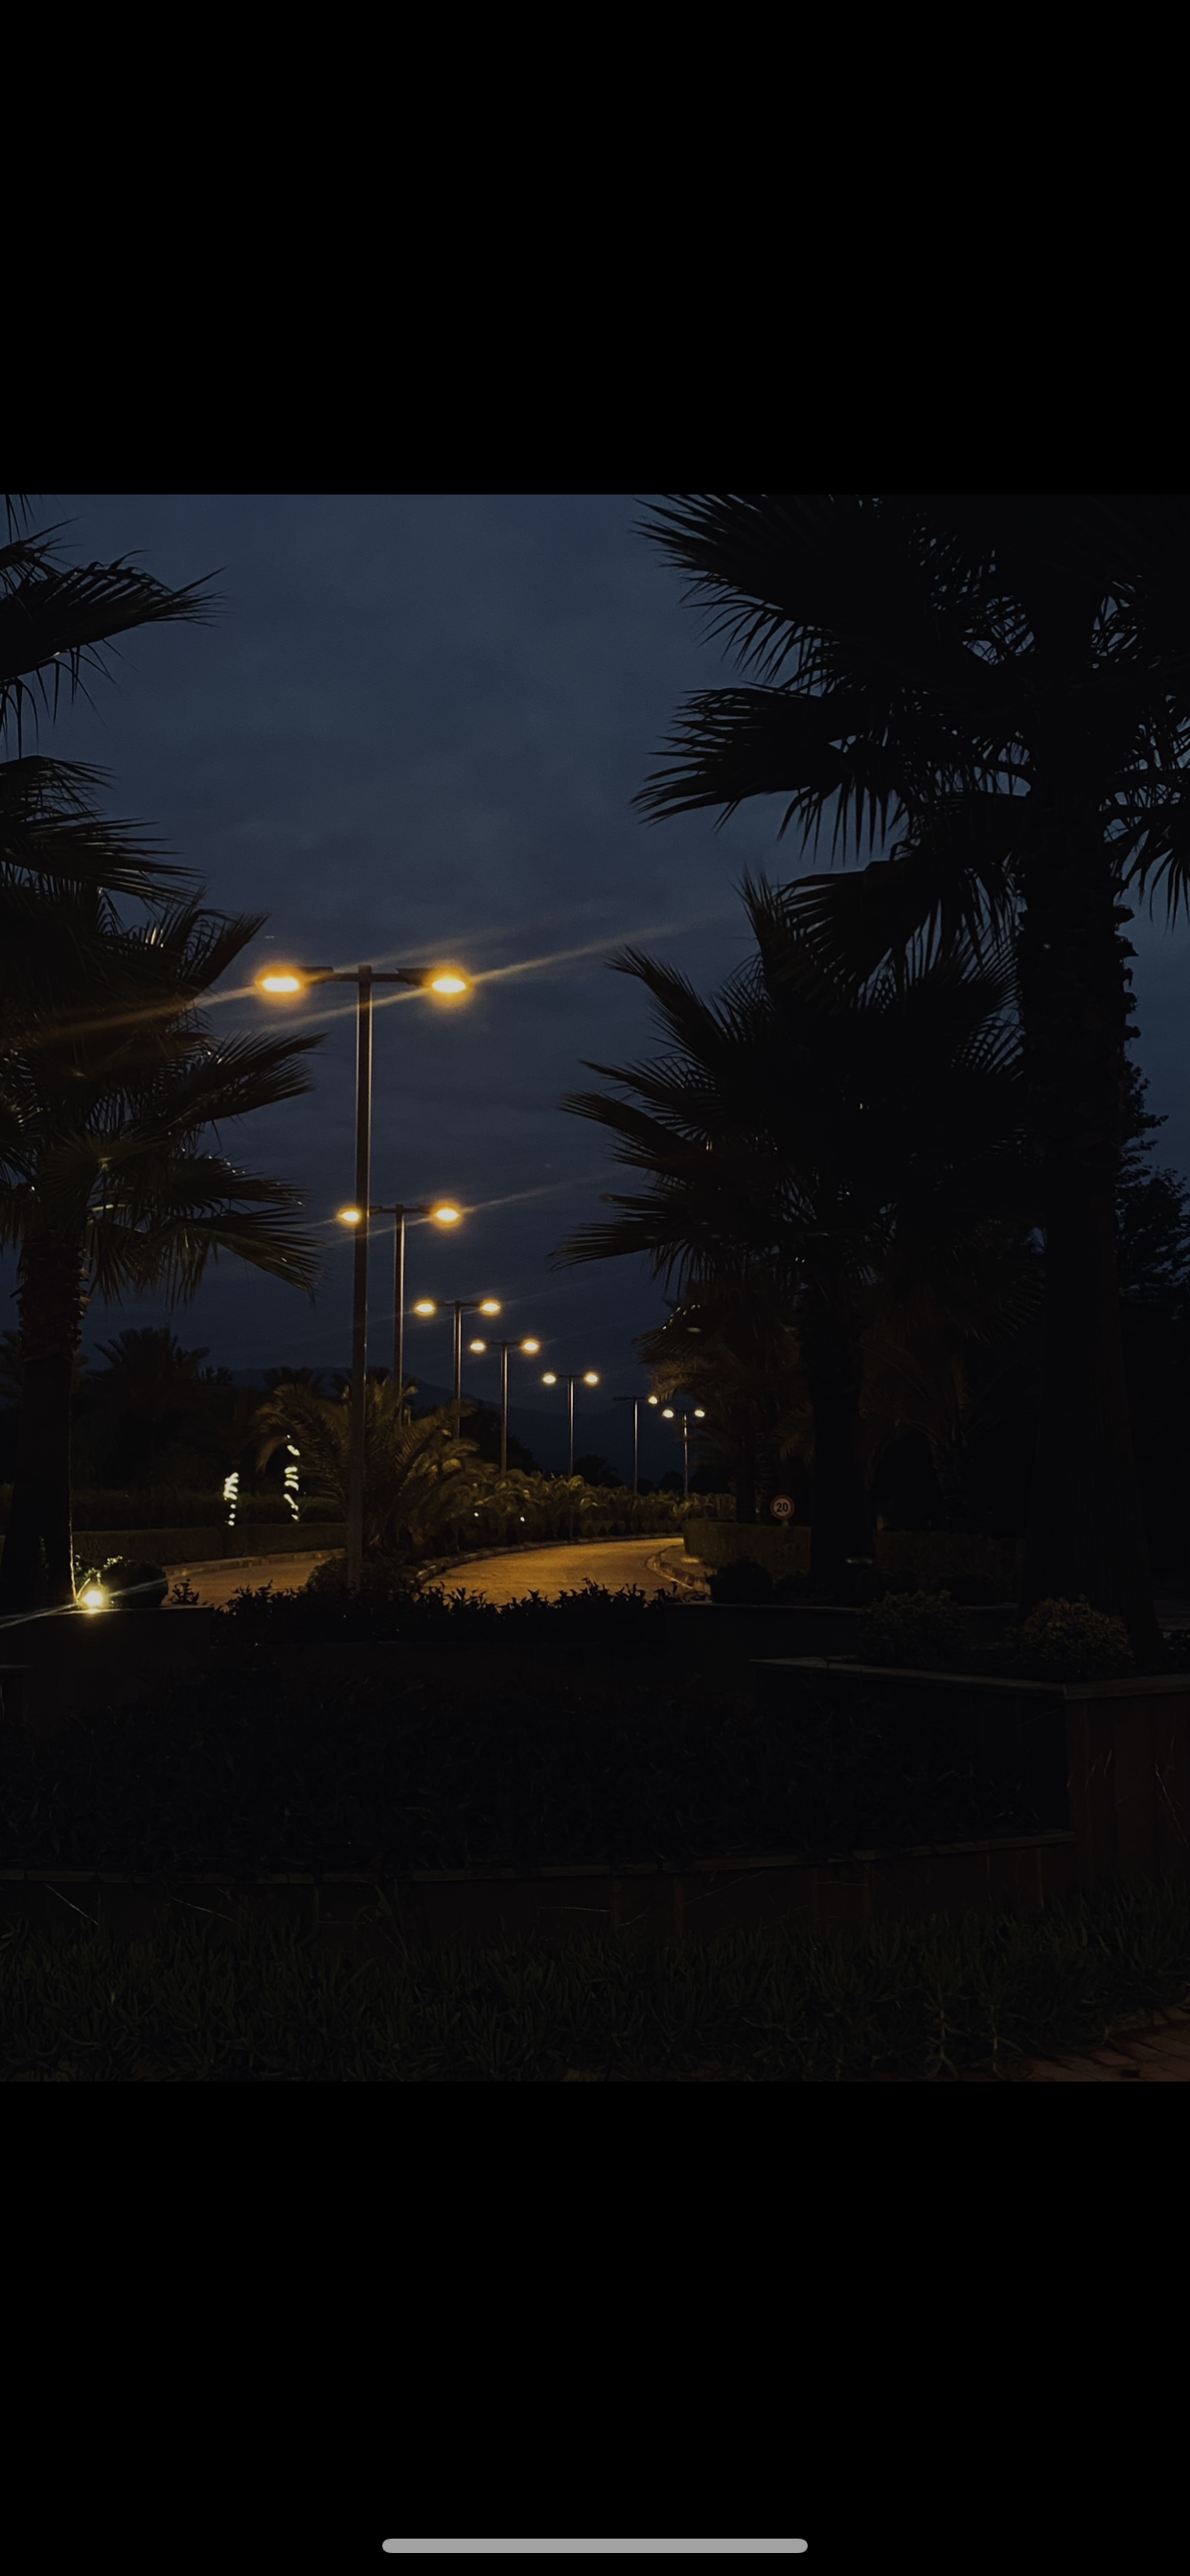 a street lights and palm trees at night